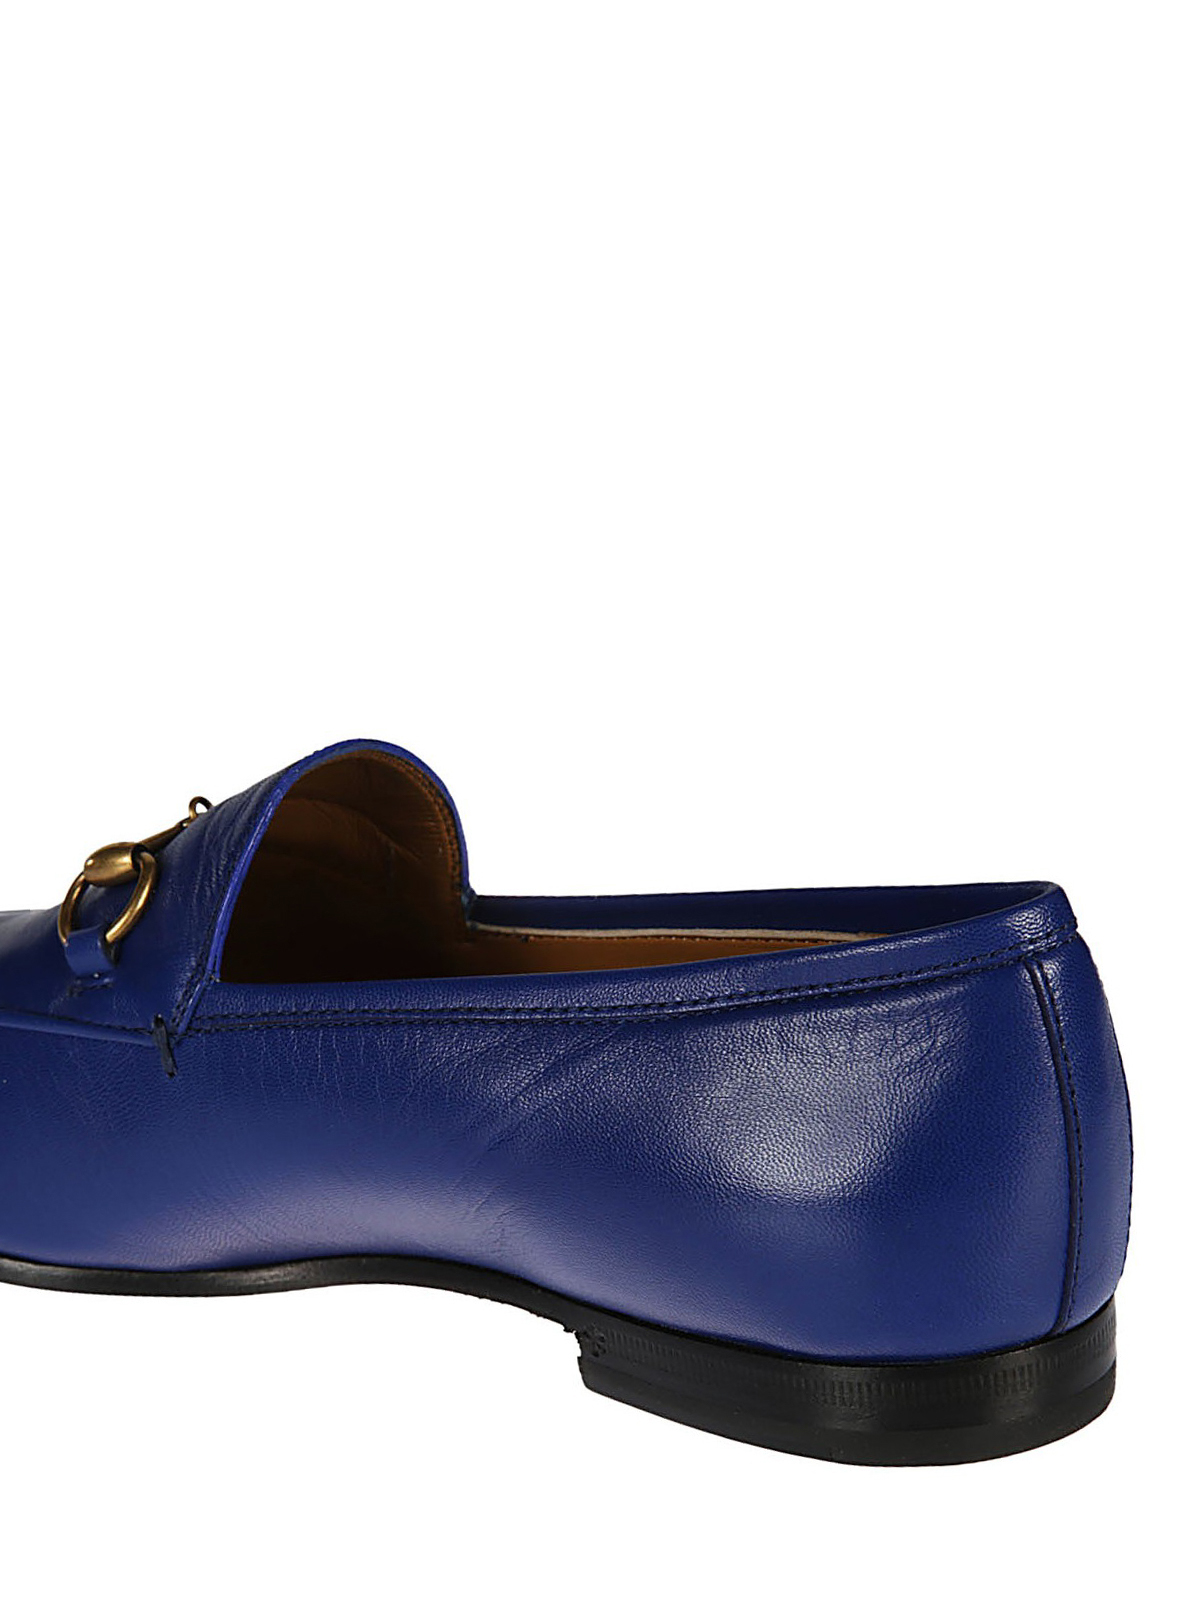 Gucci - Jordaan blue leather loafers 